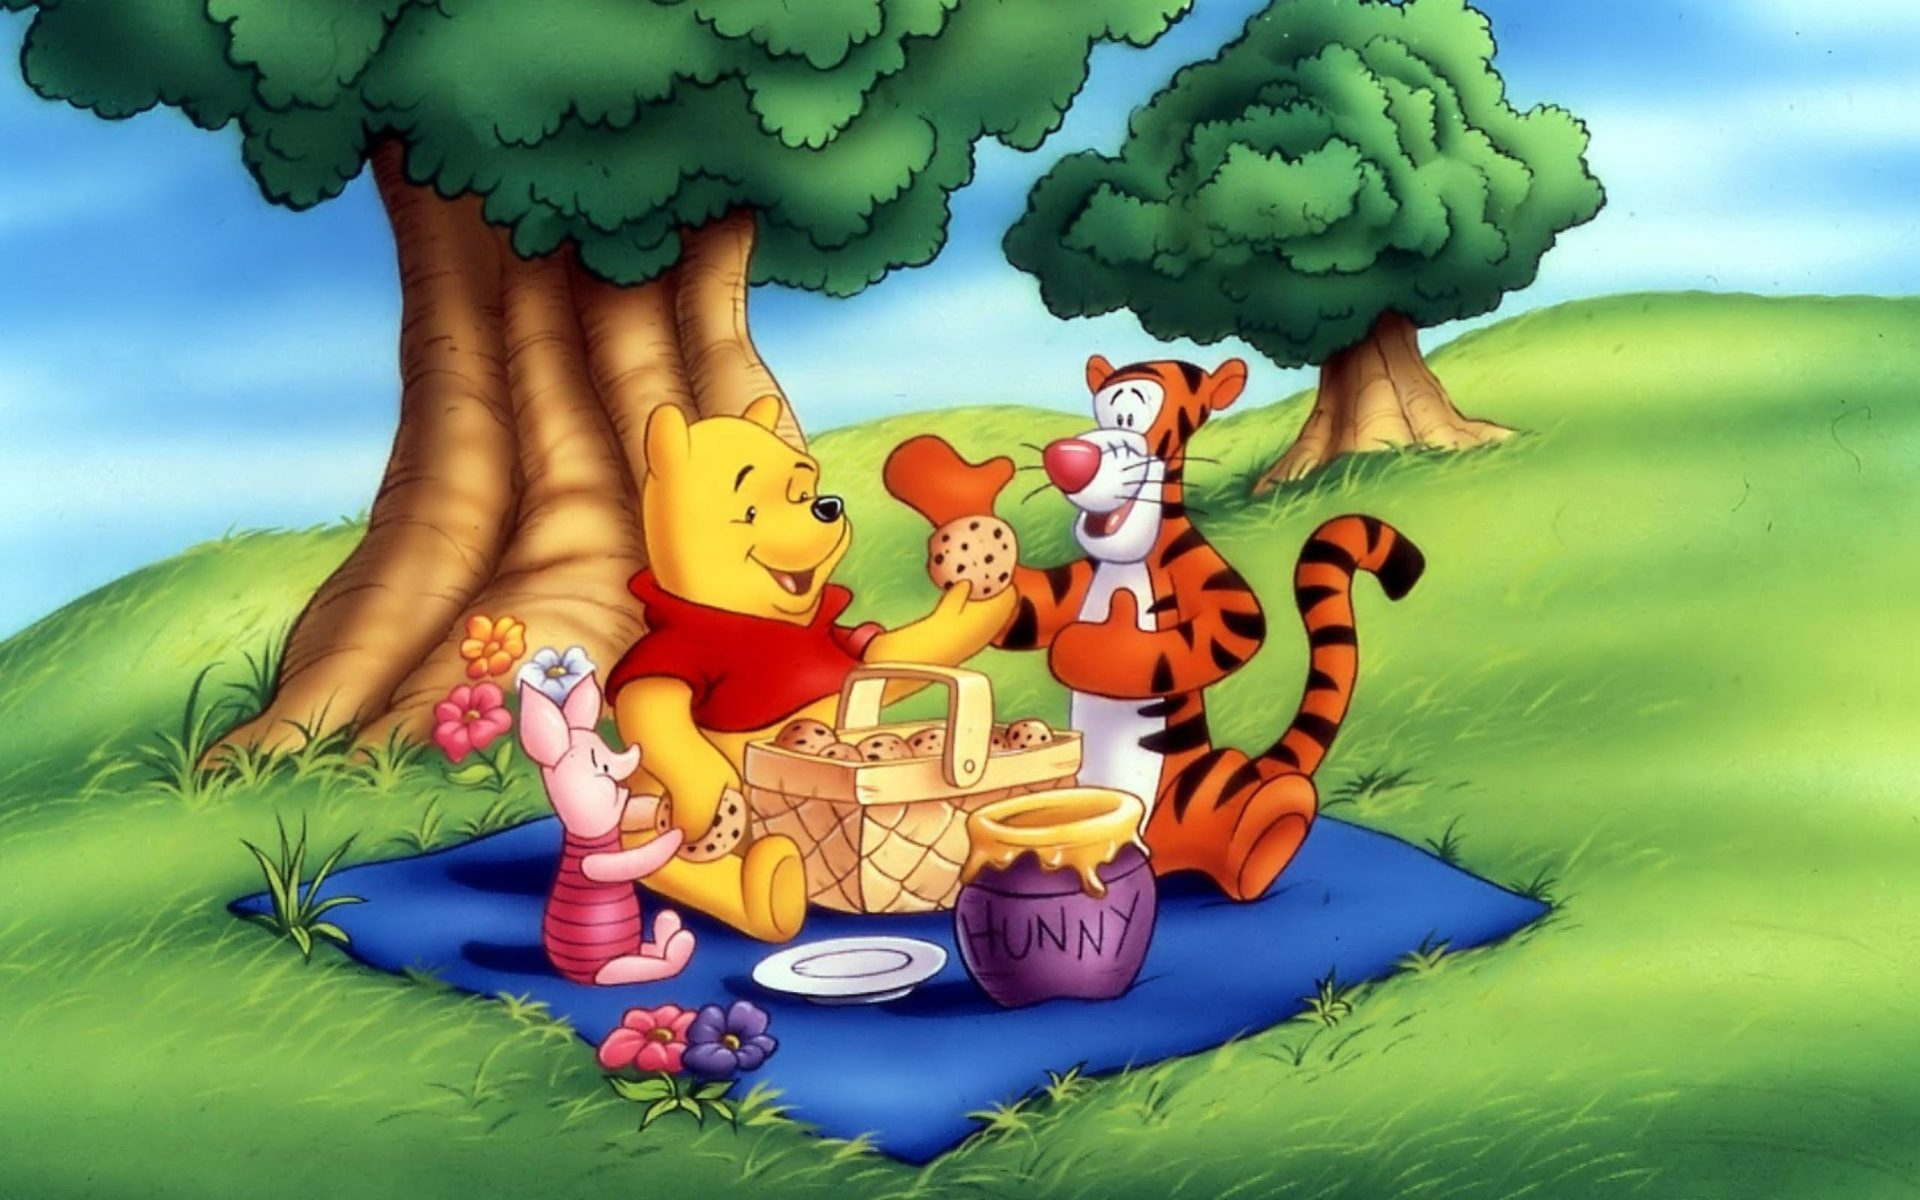 1920x1200 Winnie The Pooh Tigger And Piglet Picnic Honey Pot Basket With Pastries 2560x1600 :